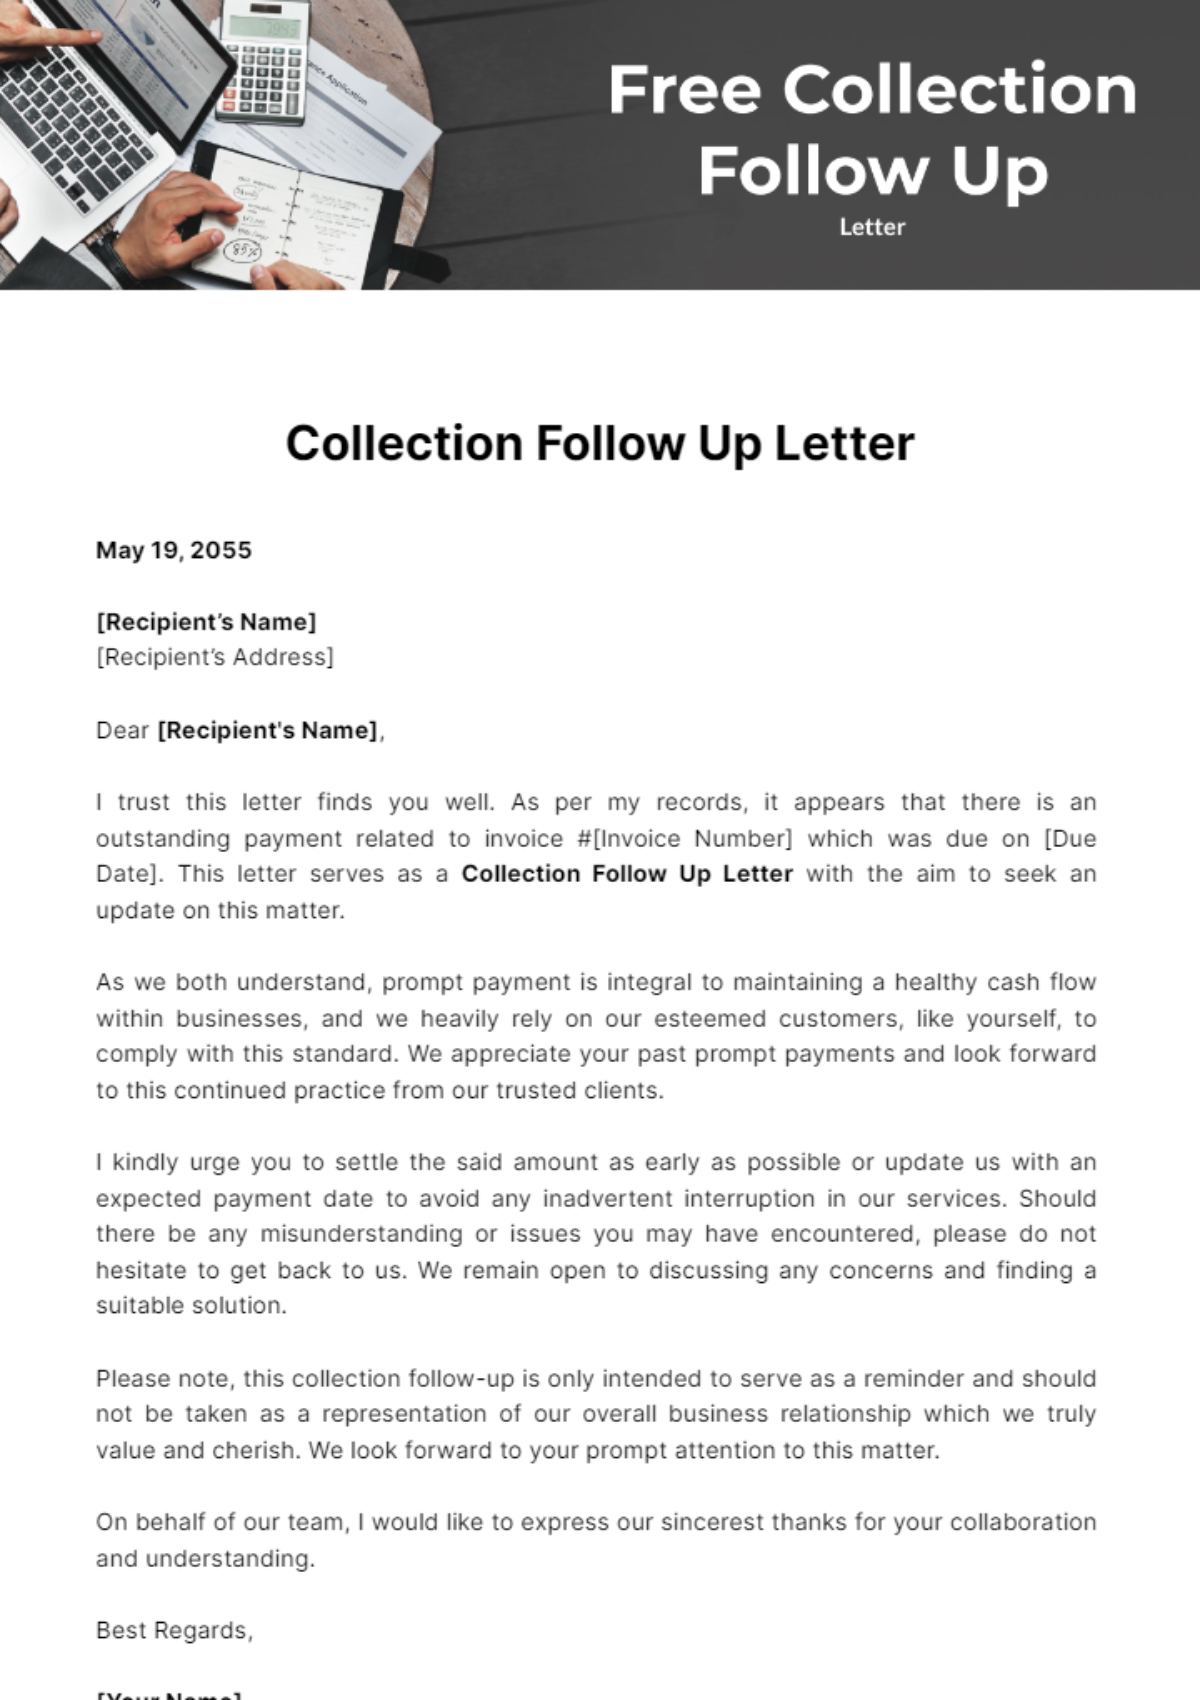 Free Collection Follow Up Letter Template